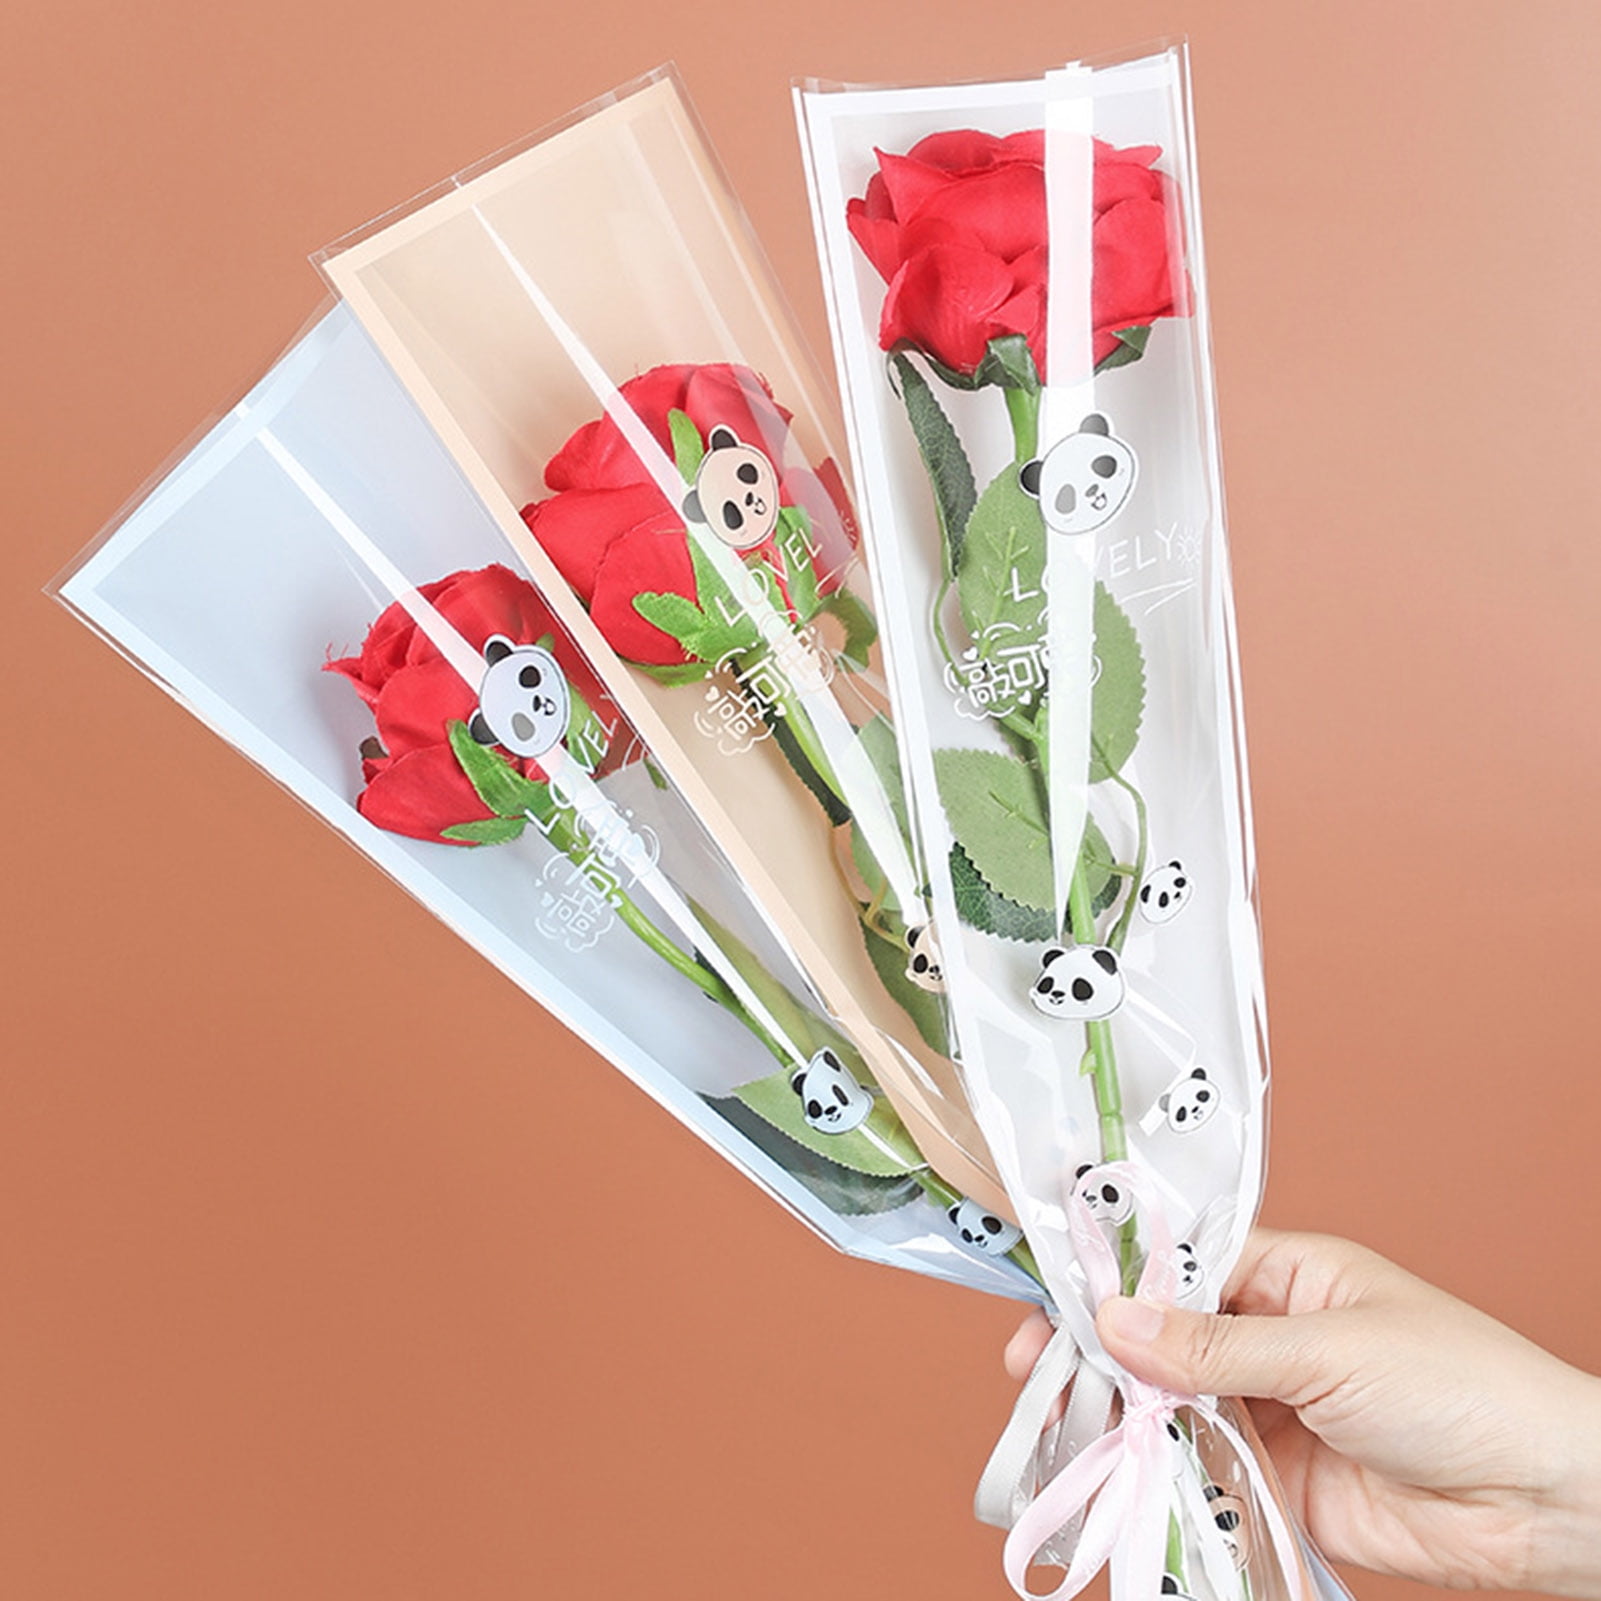 FOIMAS 120pcs Single Flower Sleeves Wrapping Bags Single Rose Florist  Bouquet Packaging Bags for Floral Arrangement Supply Wedding Valentine's  Day